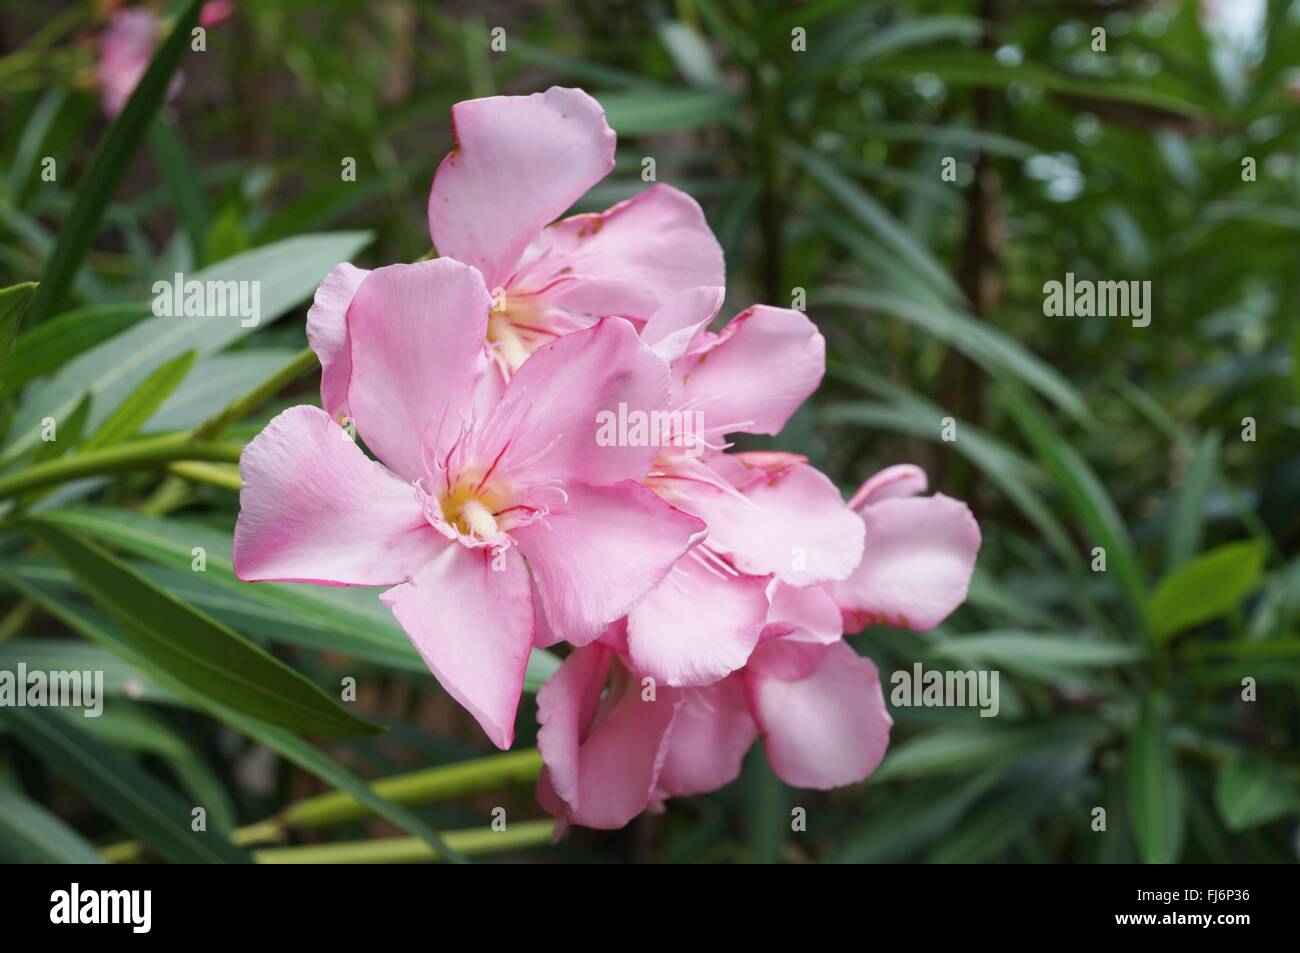 Pale pink flower clusters of nerium oleander Stock Photo